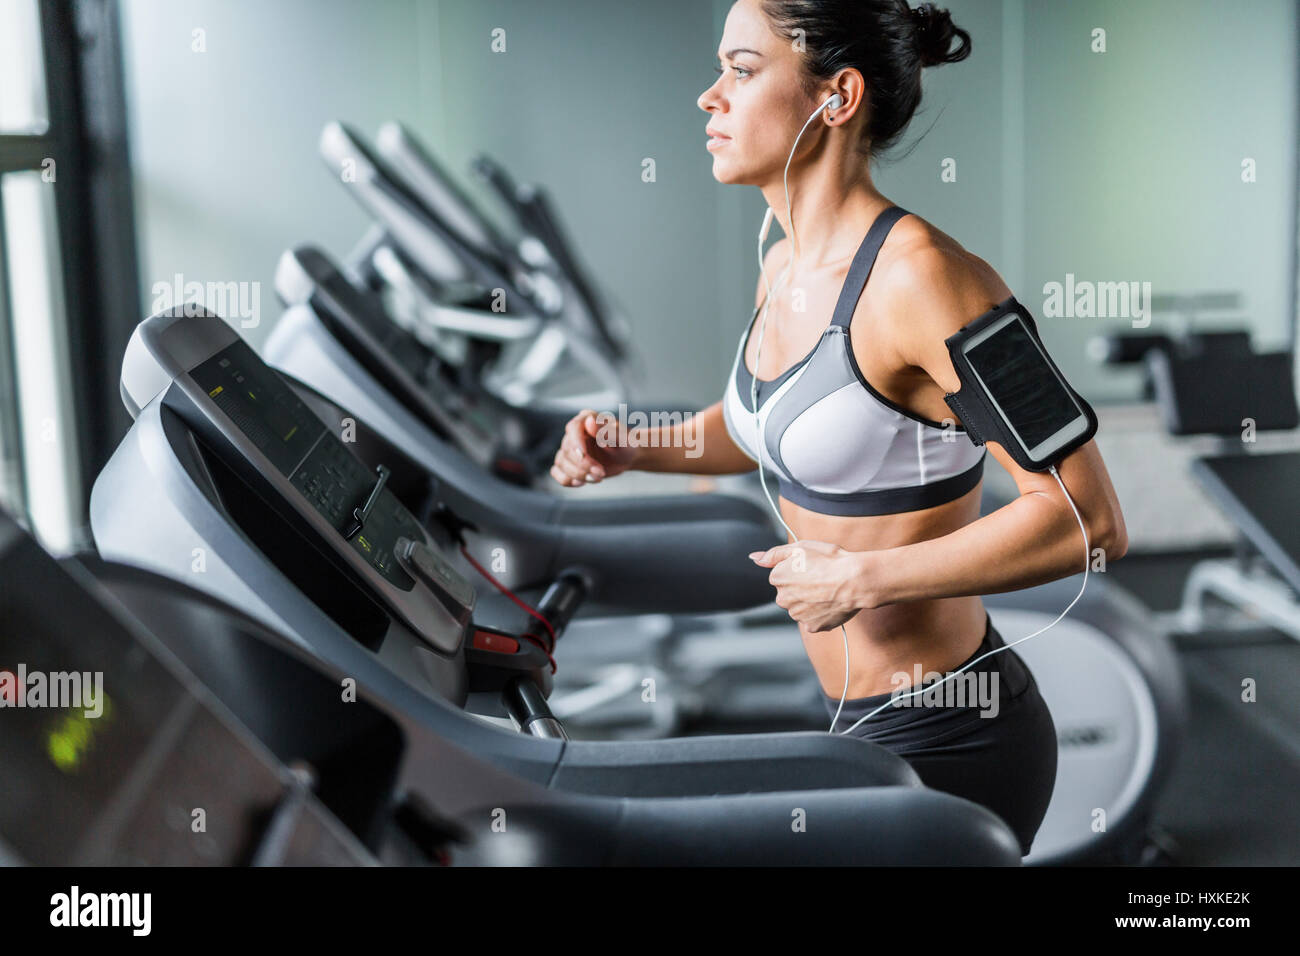 Sportive Woman Running on Treadmill with Music Stock Photo